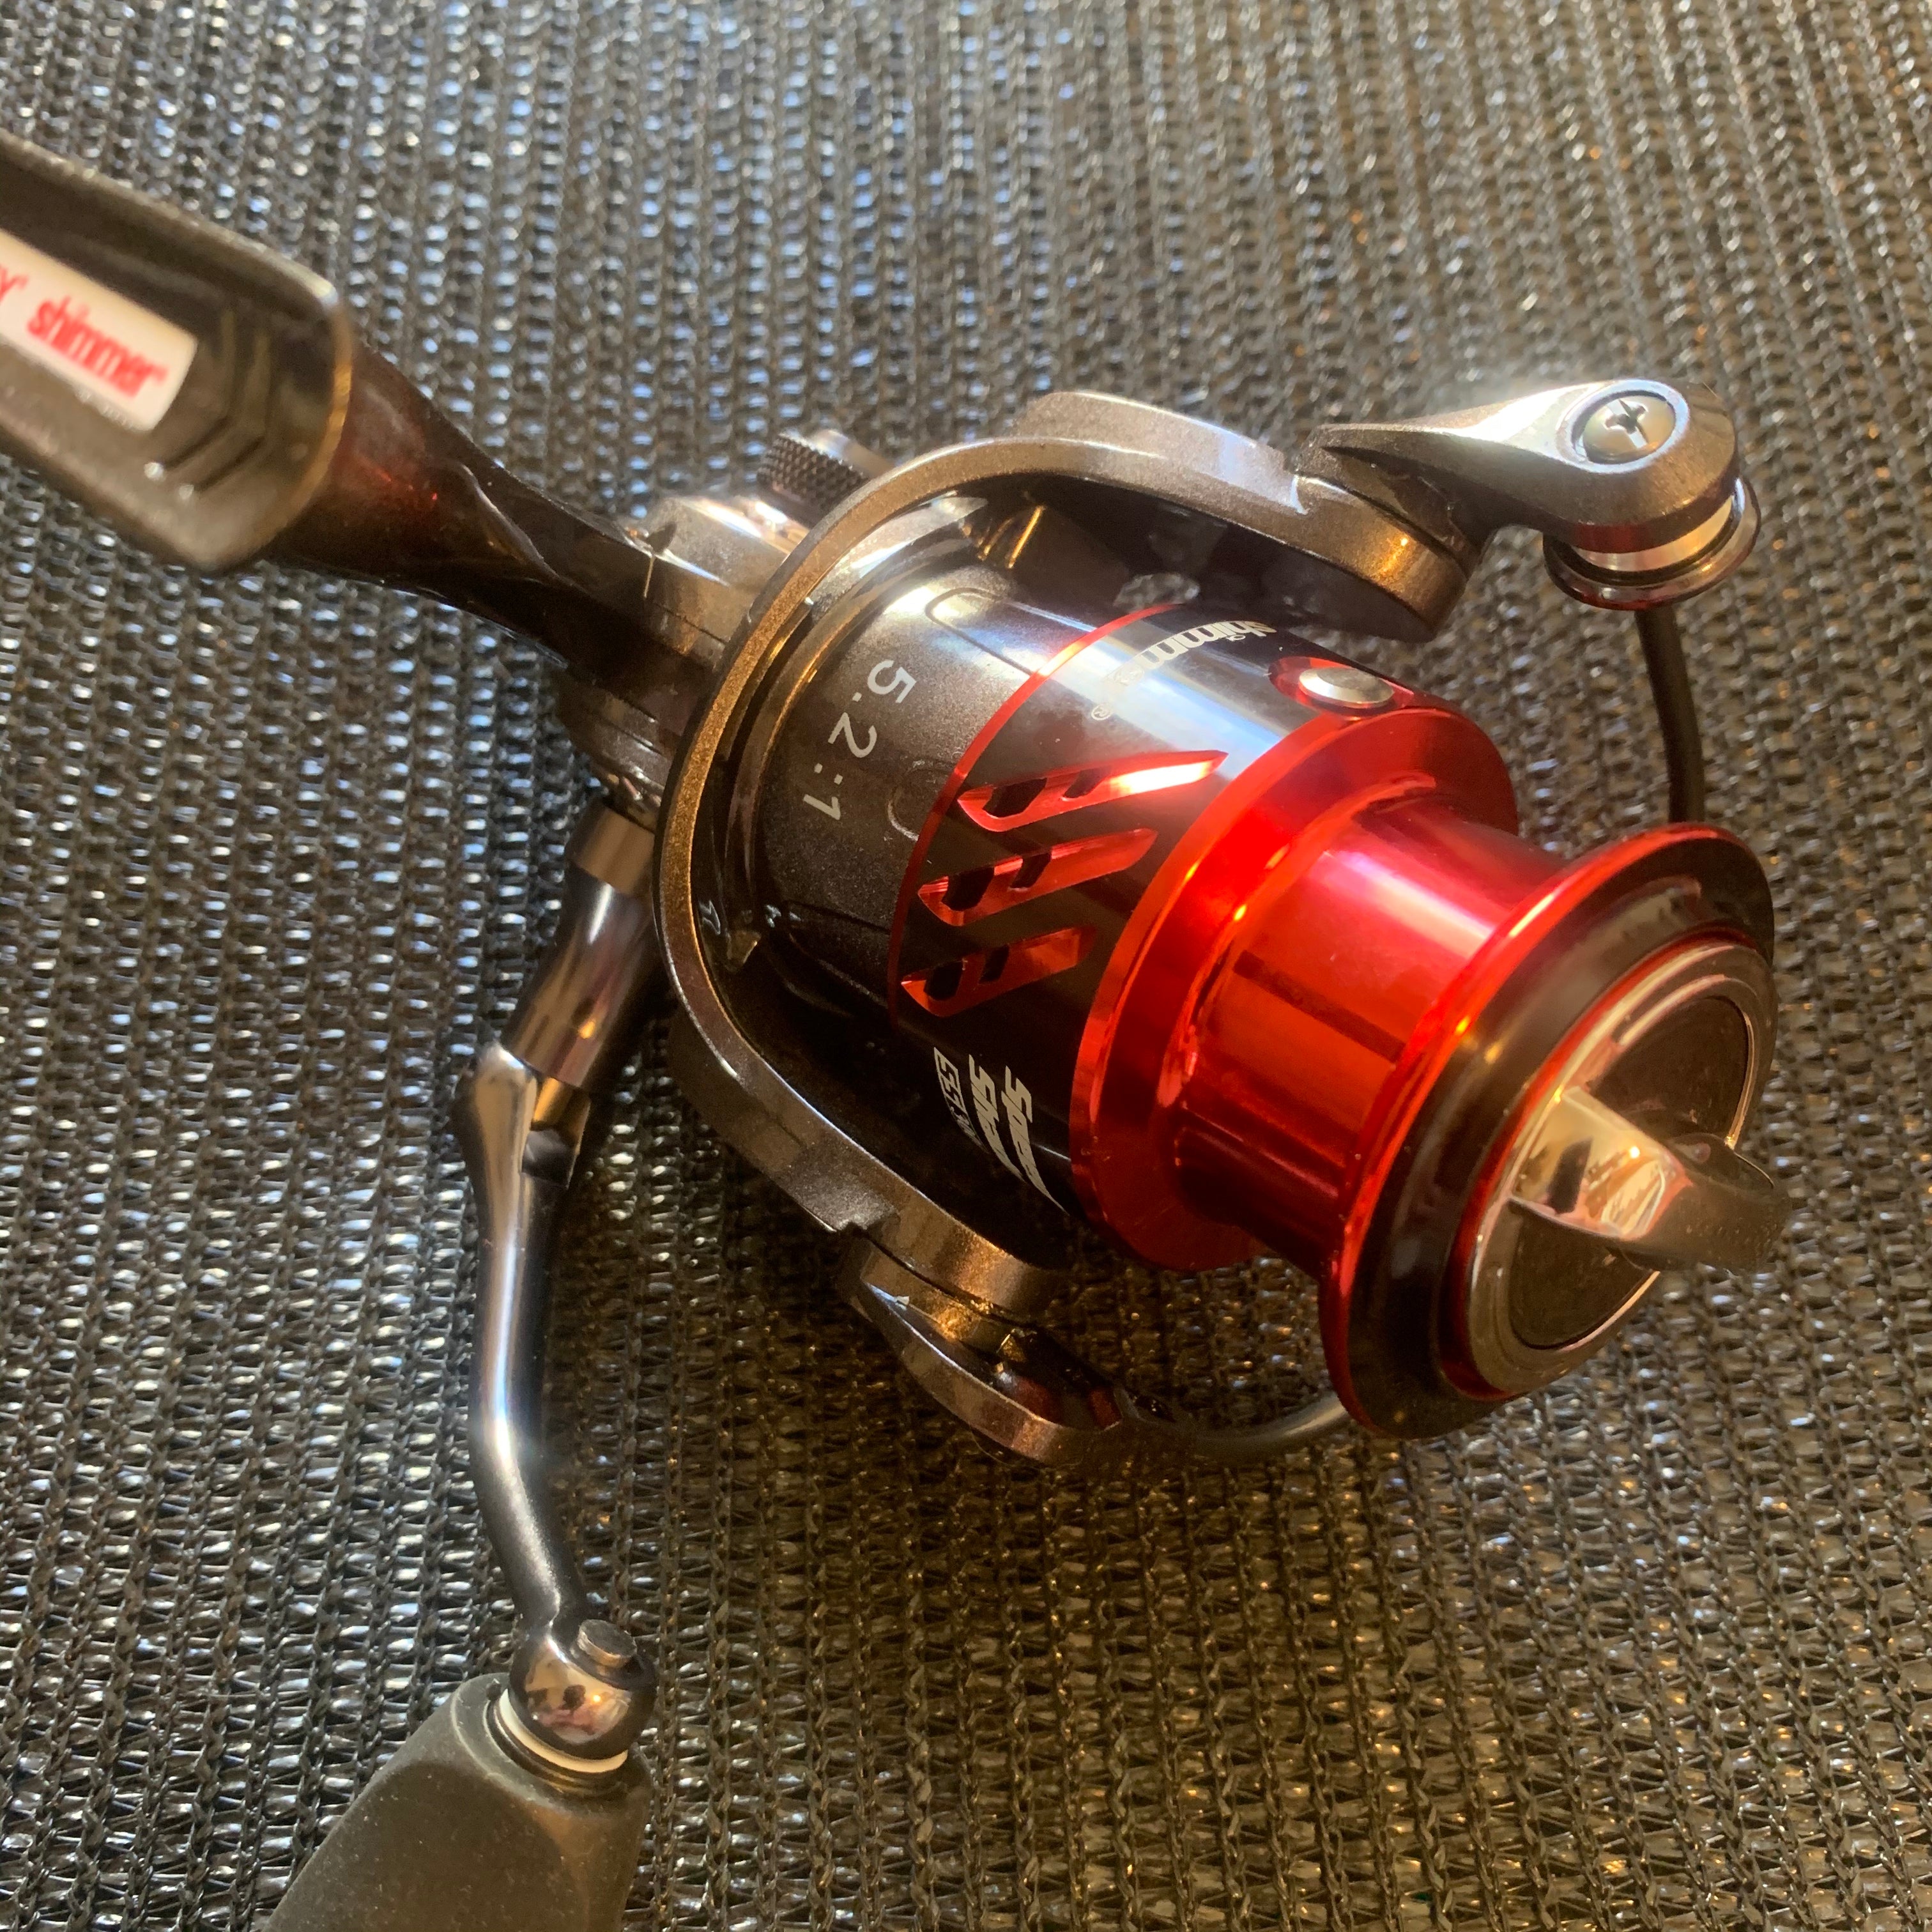 Fishing Reel Spinning Crony Speed Shadow Shimmer NEW 2021